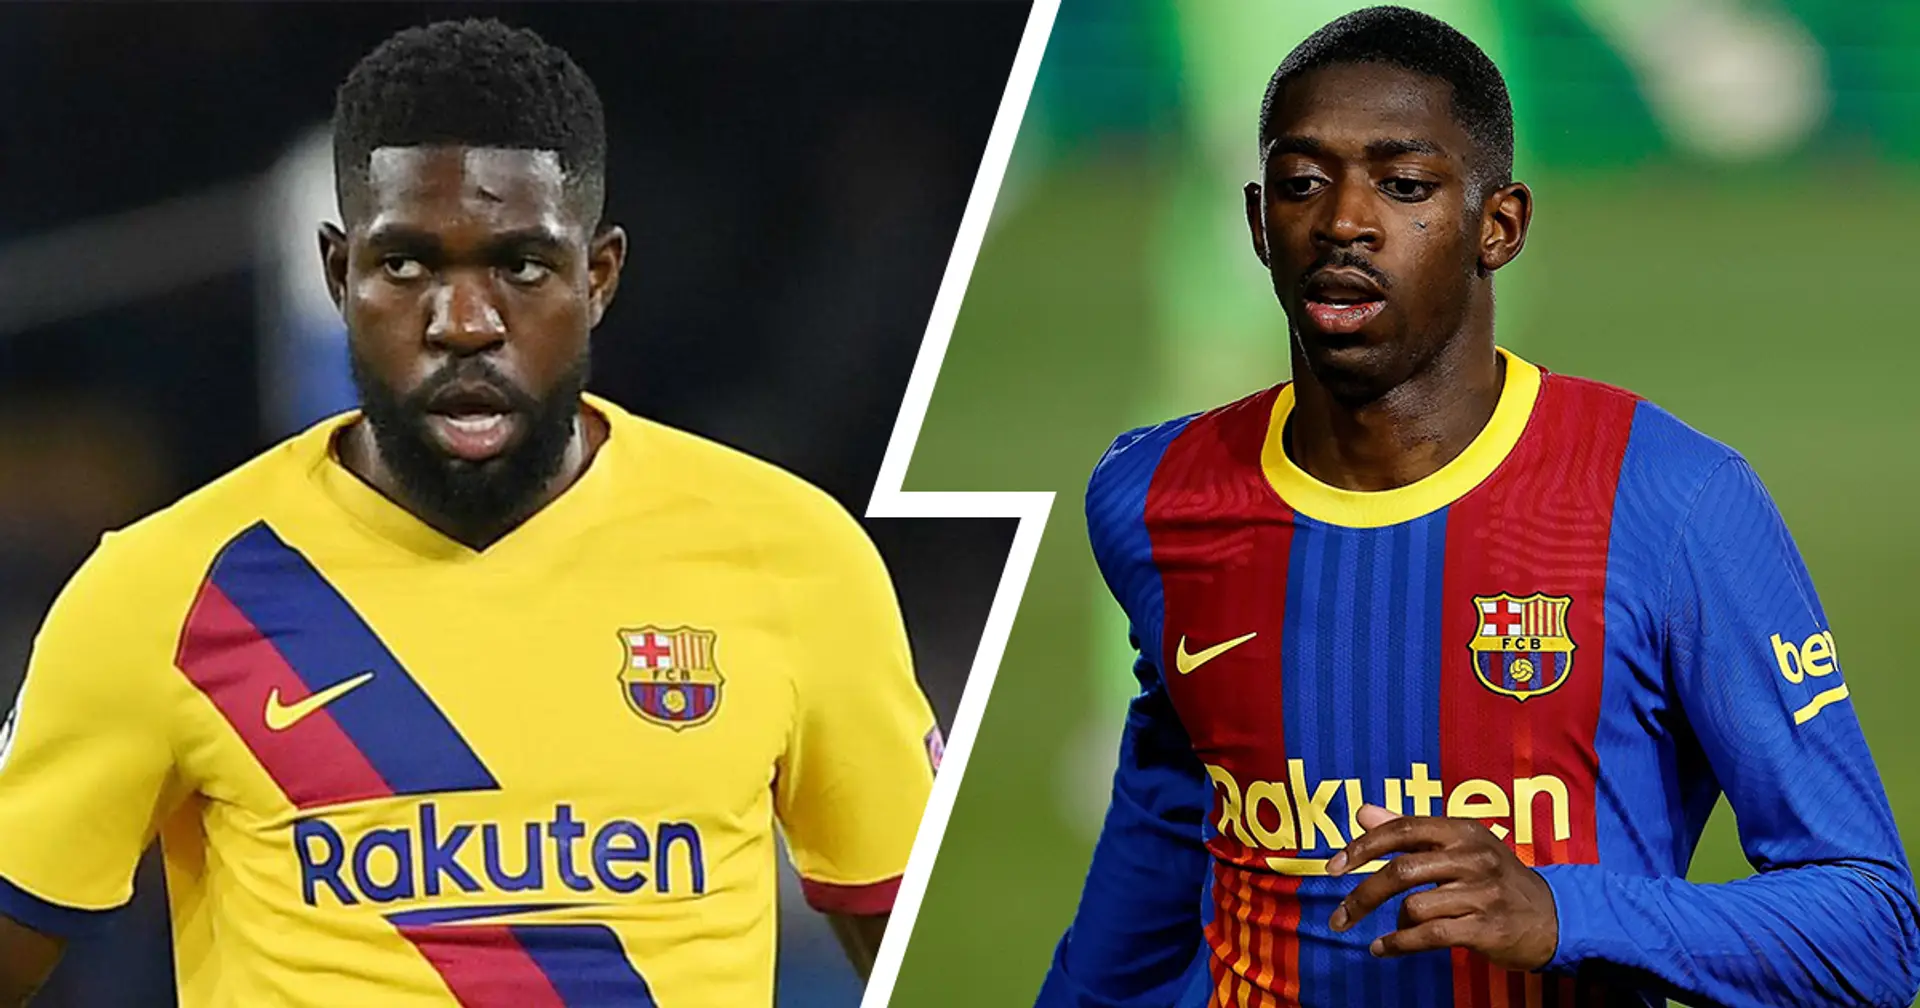 Dembele still undecided about future and 3 more unpublished stories of the day